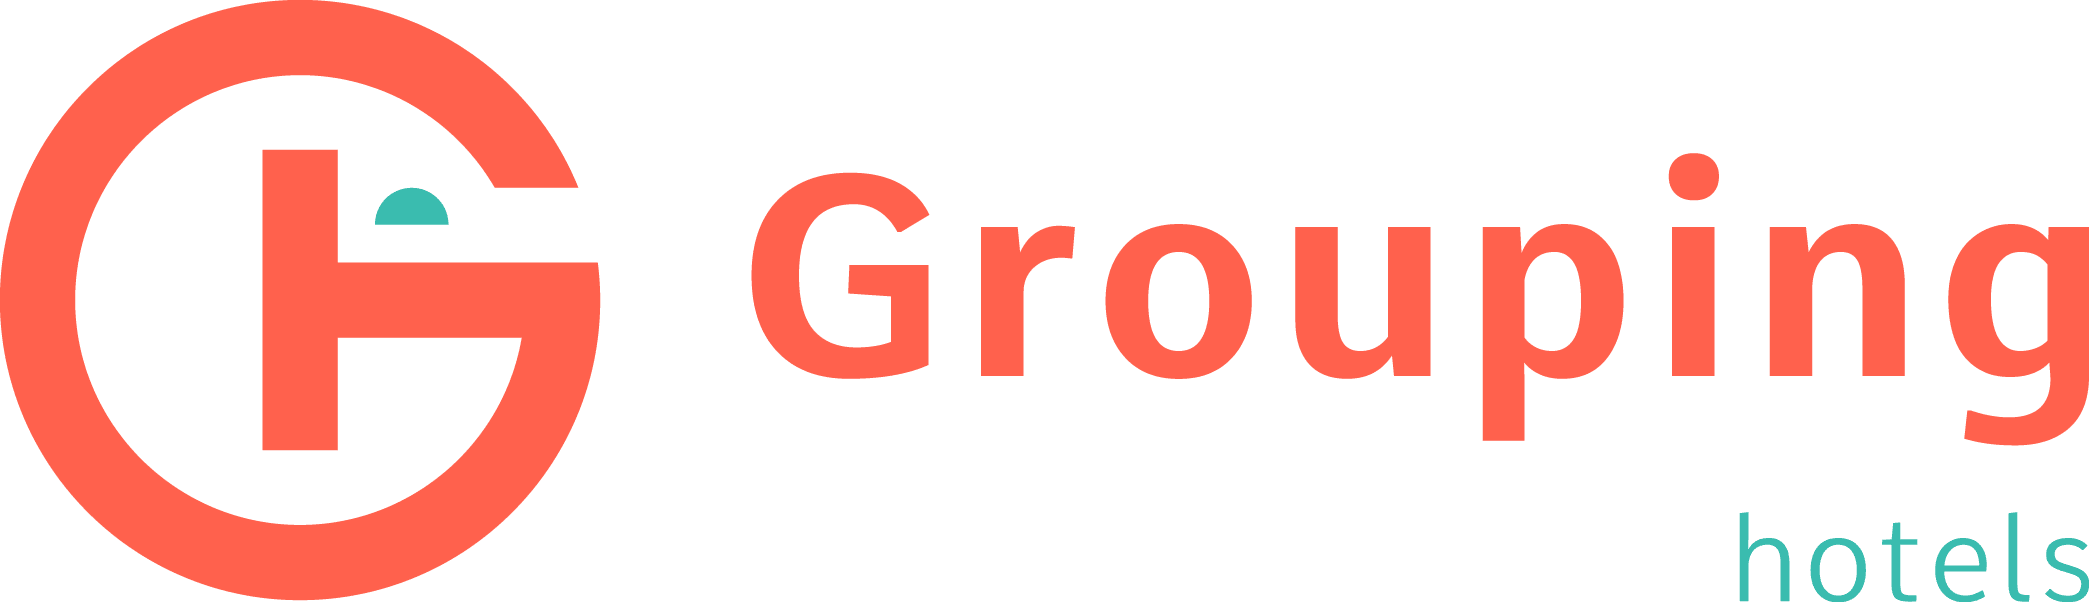 Grouping Hotels